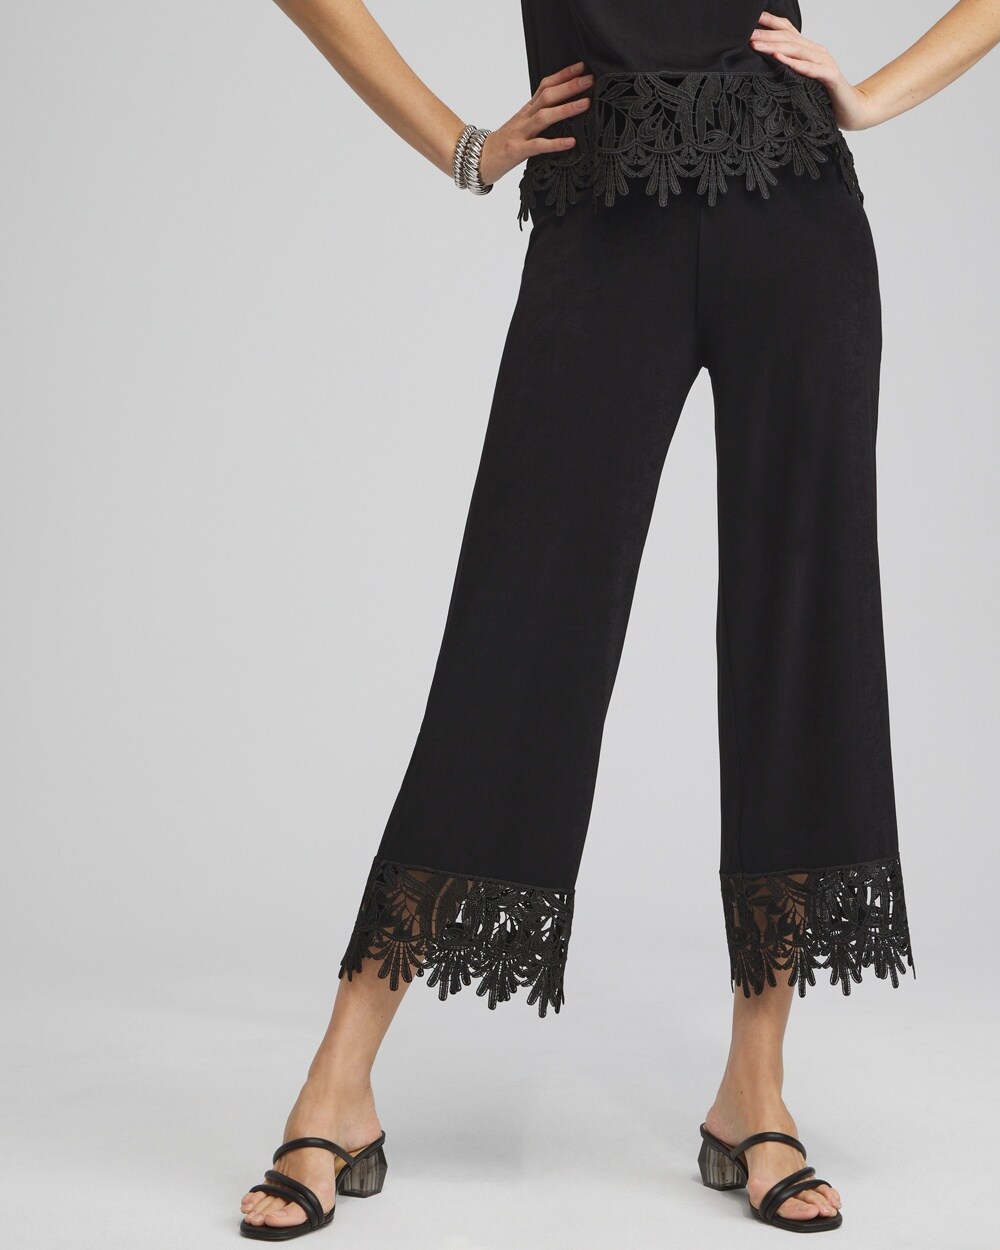 Travelers™ Lace Trim Cropped Pants